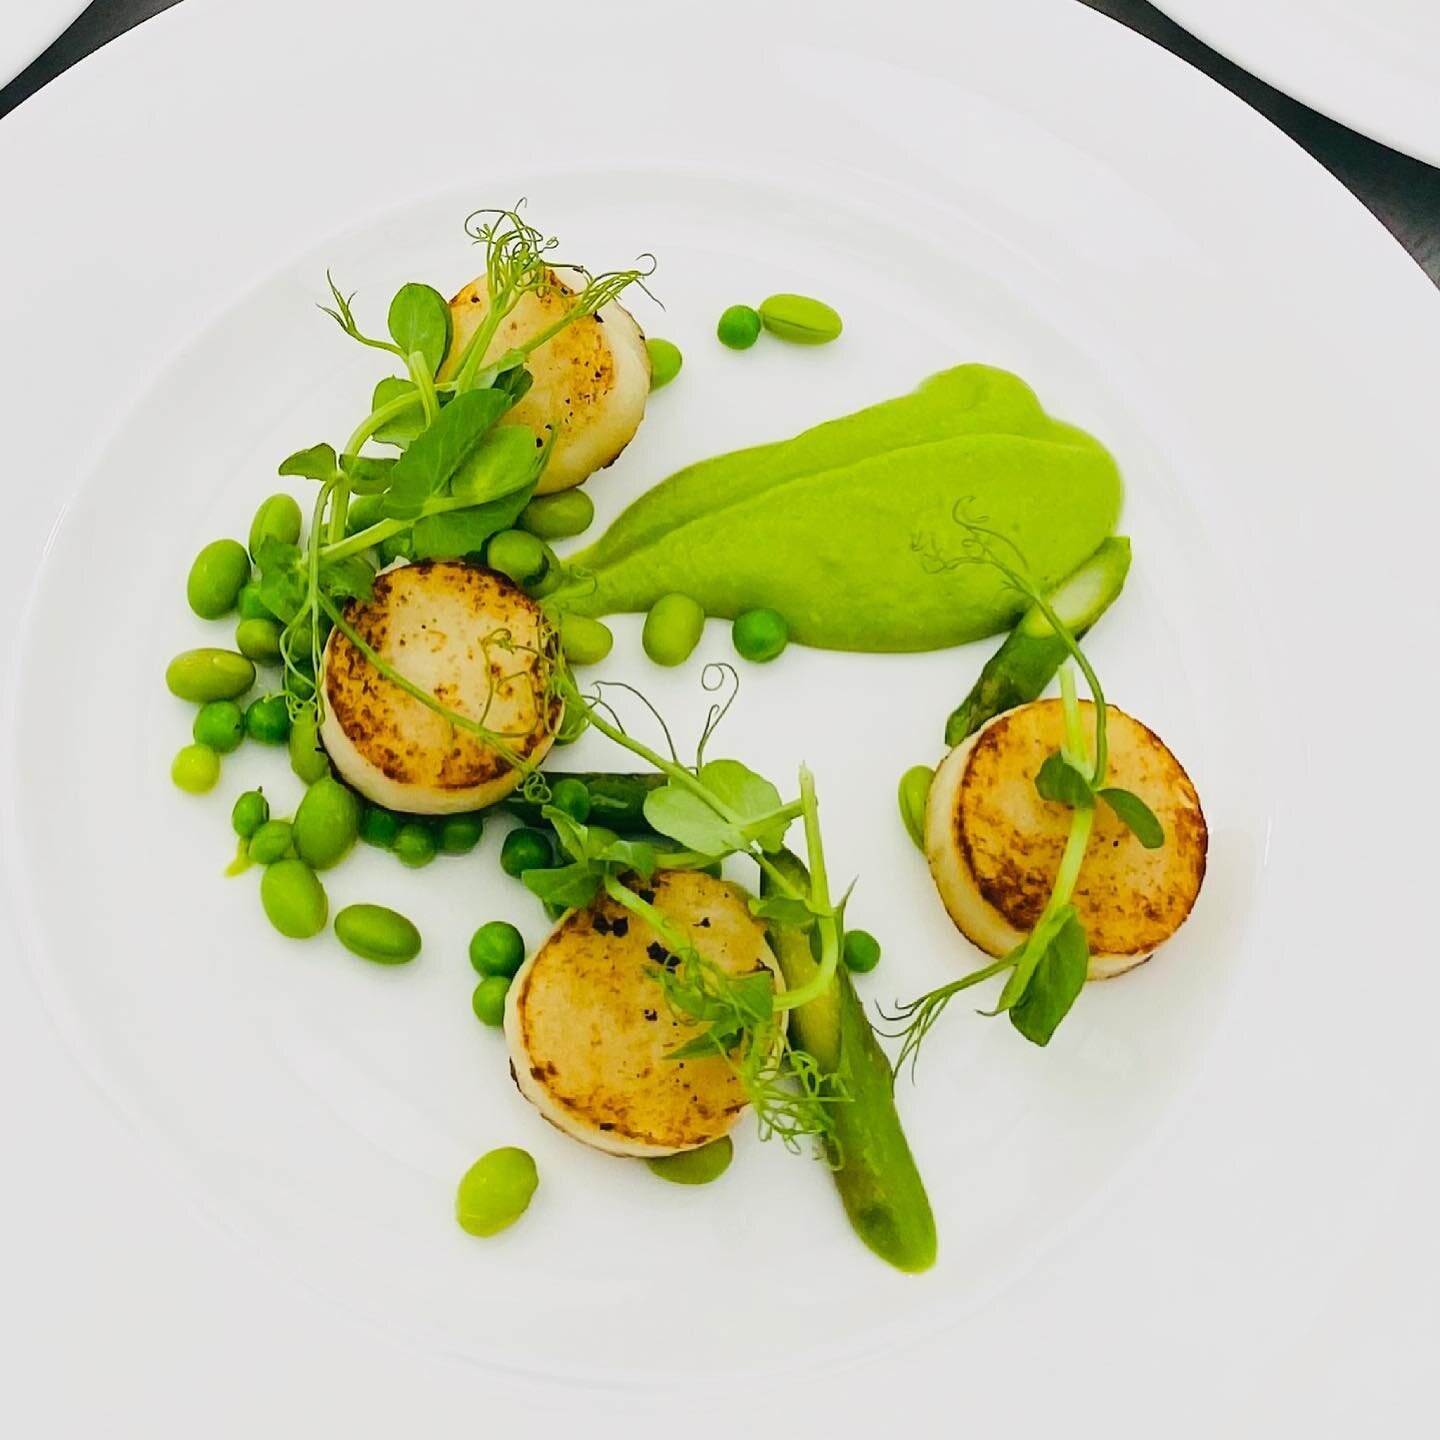 Scallops &amp; Gnocchi ! 

We think you&rsquo;ll enjoy this game - spot the scallop ! We love for everyone to feel they are sitting to eat a similar dish regardless of dietary requirements! Hitting the grid today we have two of the starters from our 